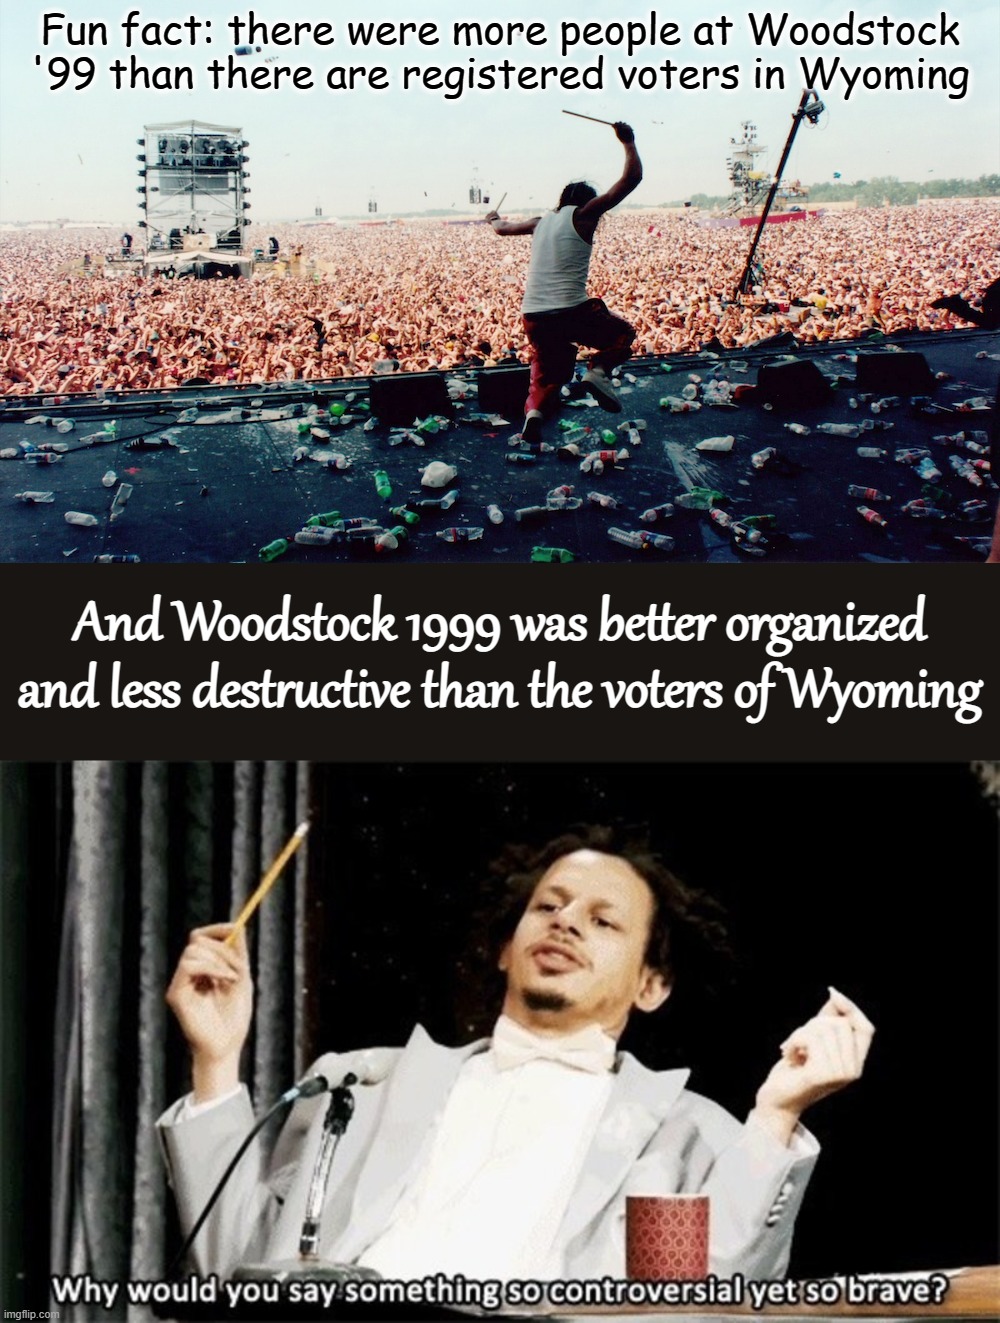 Woodstock '99 vs. MAGA primary voters | Fun fact: there were more people at Woodstock '99 than there are registered voters in Wyoming; And Woodstock 1999 was better organized and less destructive than the voters of Wyoming | image tagged in woodstock 1999,why would you say something so controversial yet so brave,woodstock,wyoming,political joke,politics lol | made w/ Imgflip meme maker